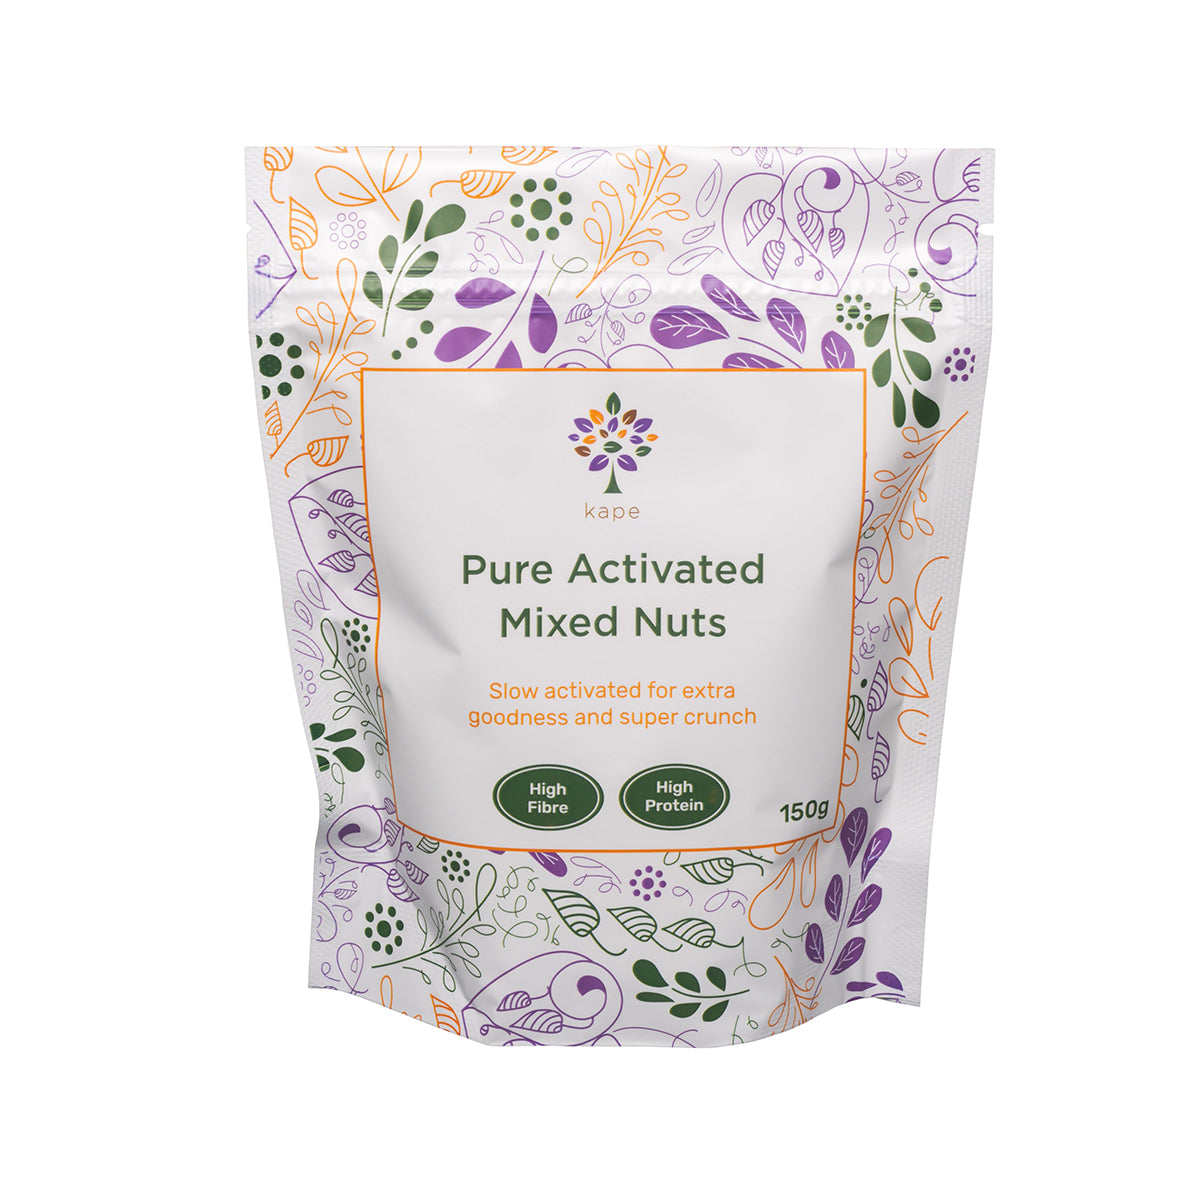 Pure Activated Mixed Nuts